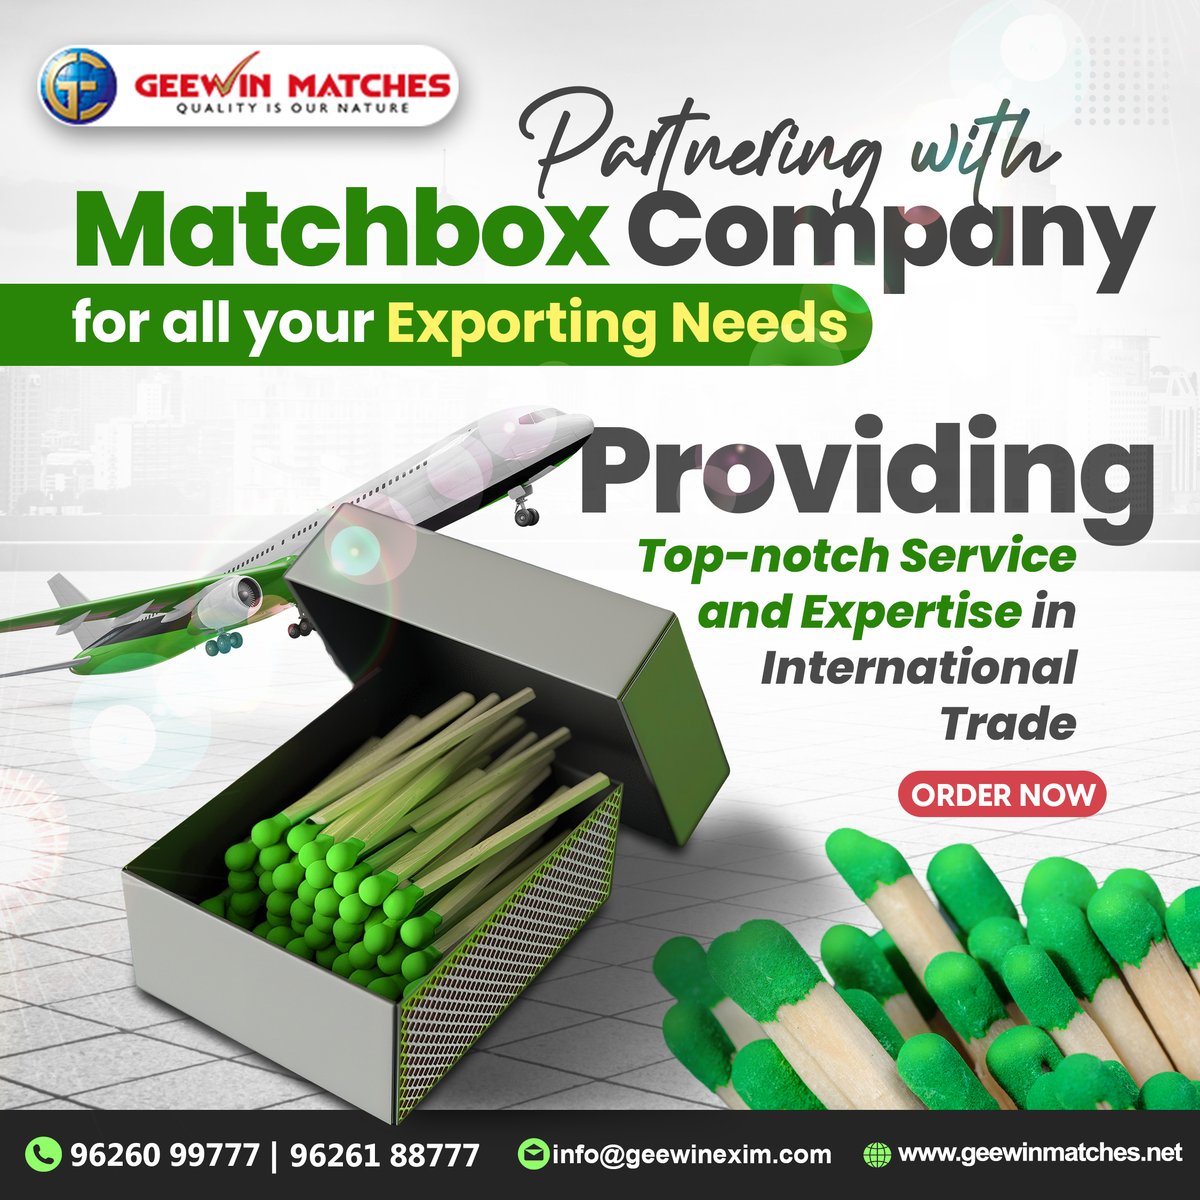 Experience the perfect blend of style and functionality with our premium quality products.

#geewinmatches #safetymatches #matchbox #matchstick #matchboxes #qualitymatchbox #waxmatchbox #cardboardmatchboxes #barbequematches #matchboxlabel #kitchensafety #kitchenproducts #exporter